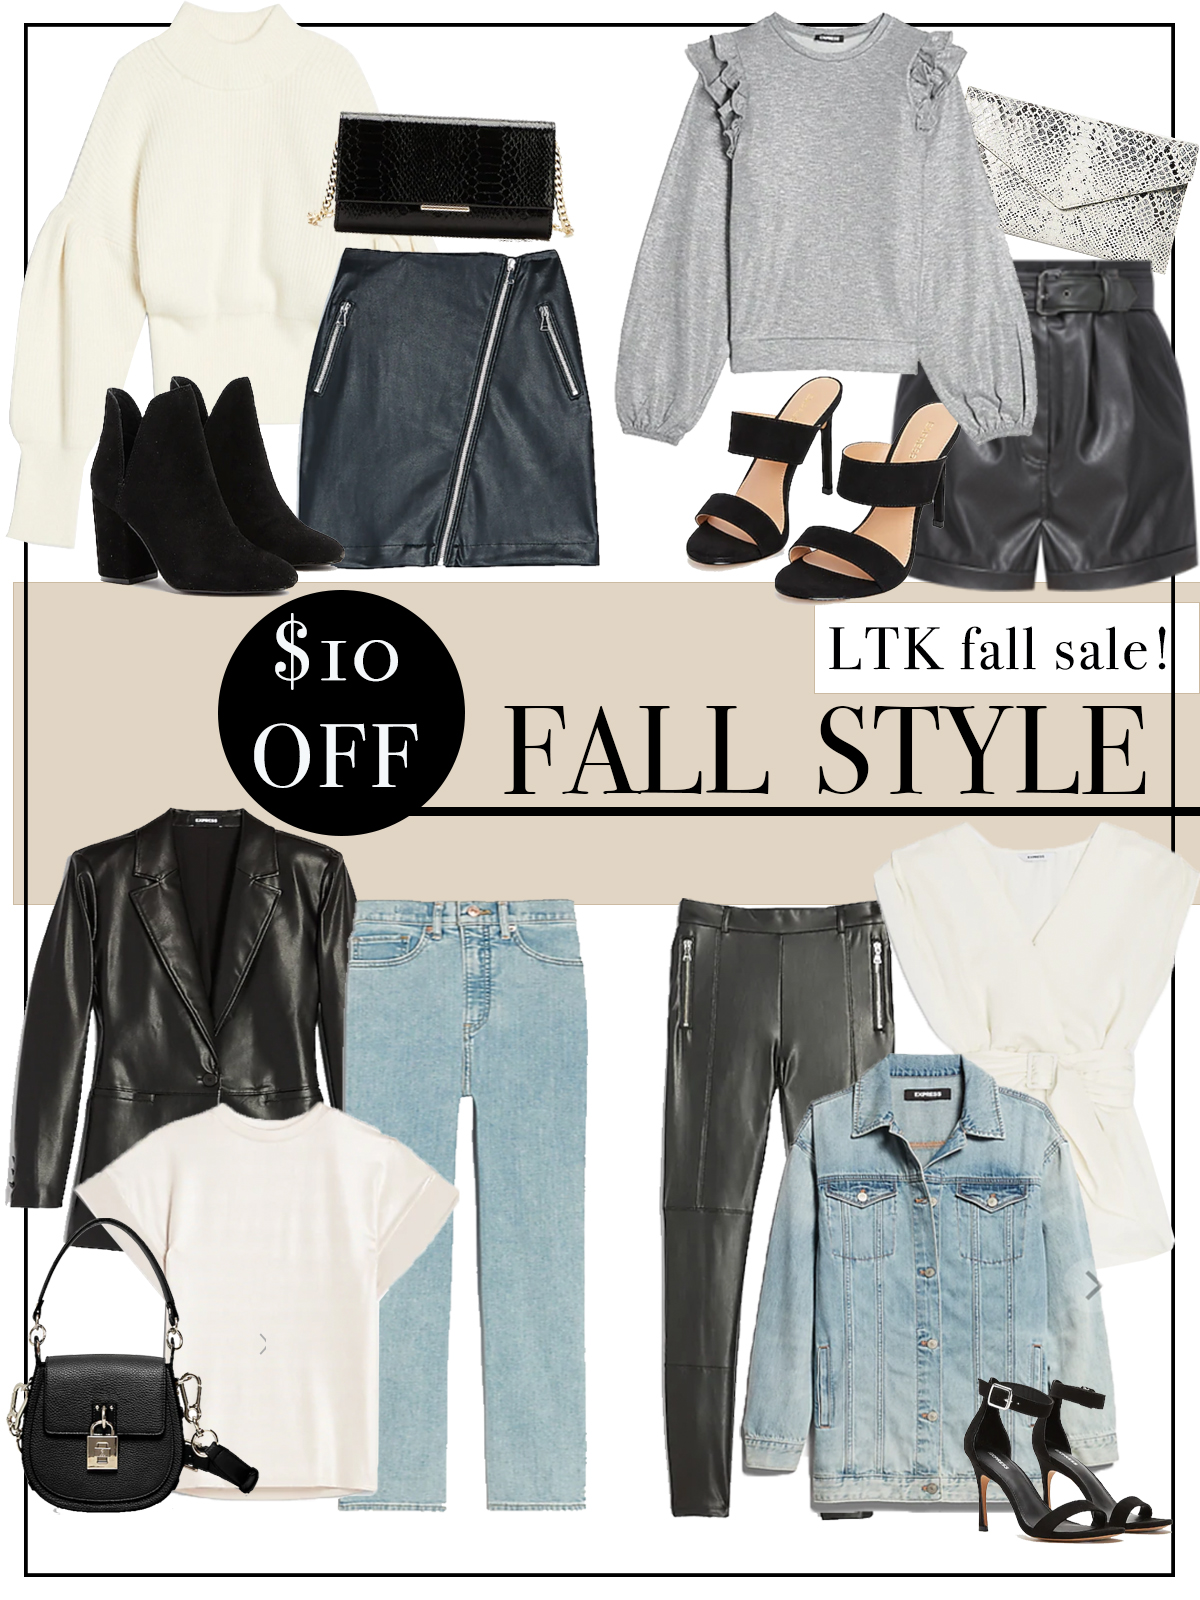 EXPRESS FALL FASHION, OUTFIT IDEAS